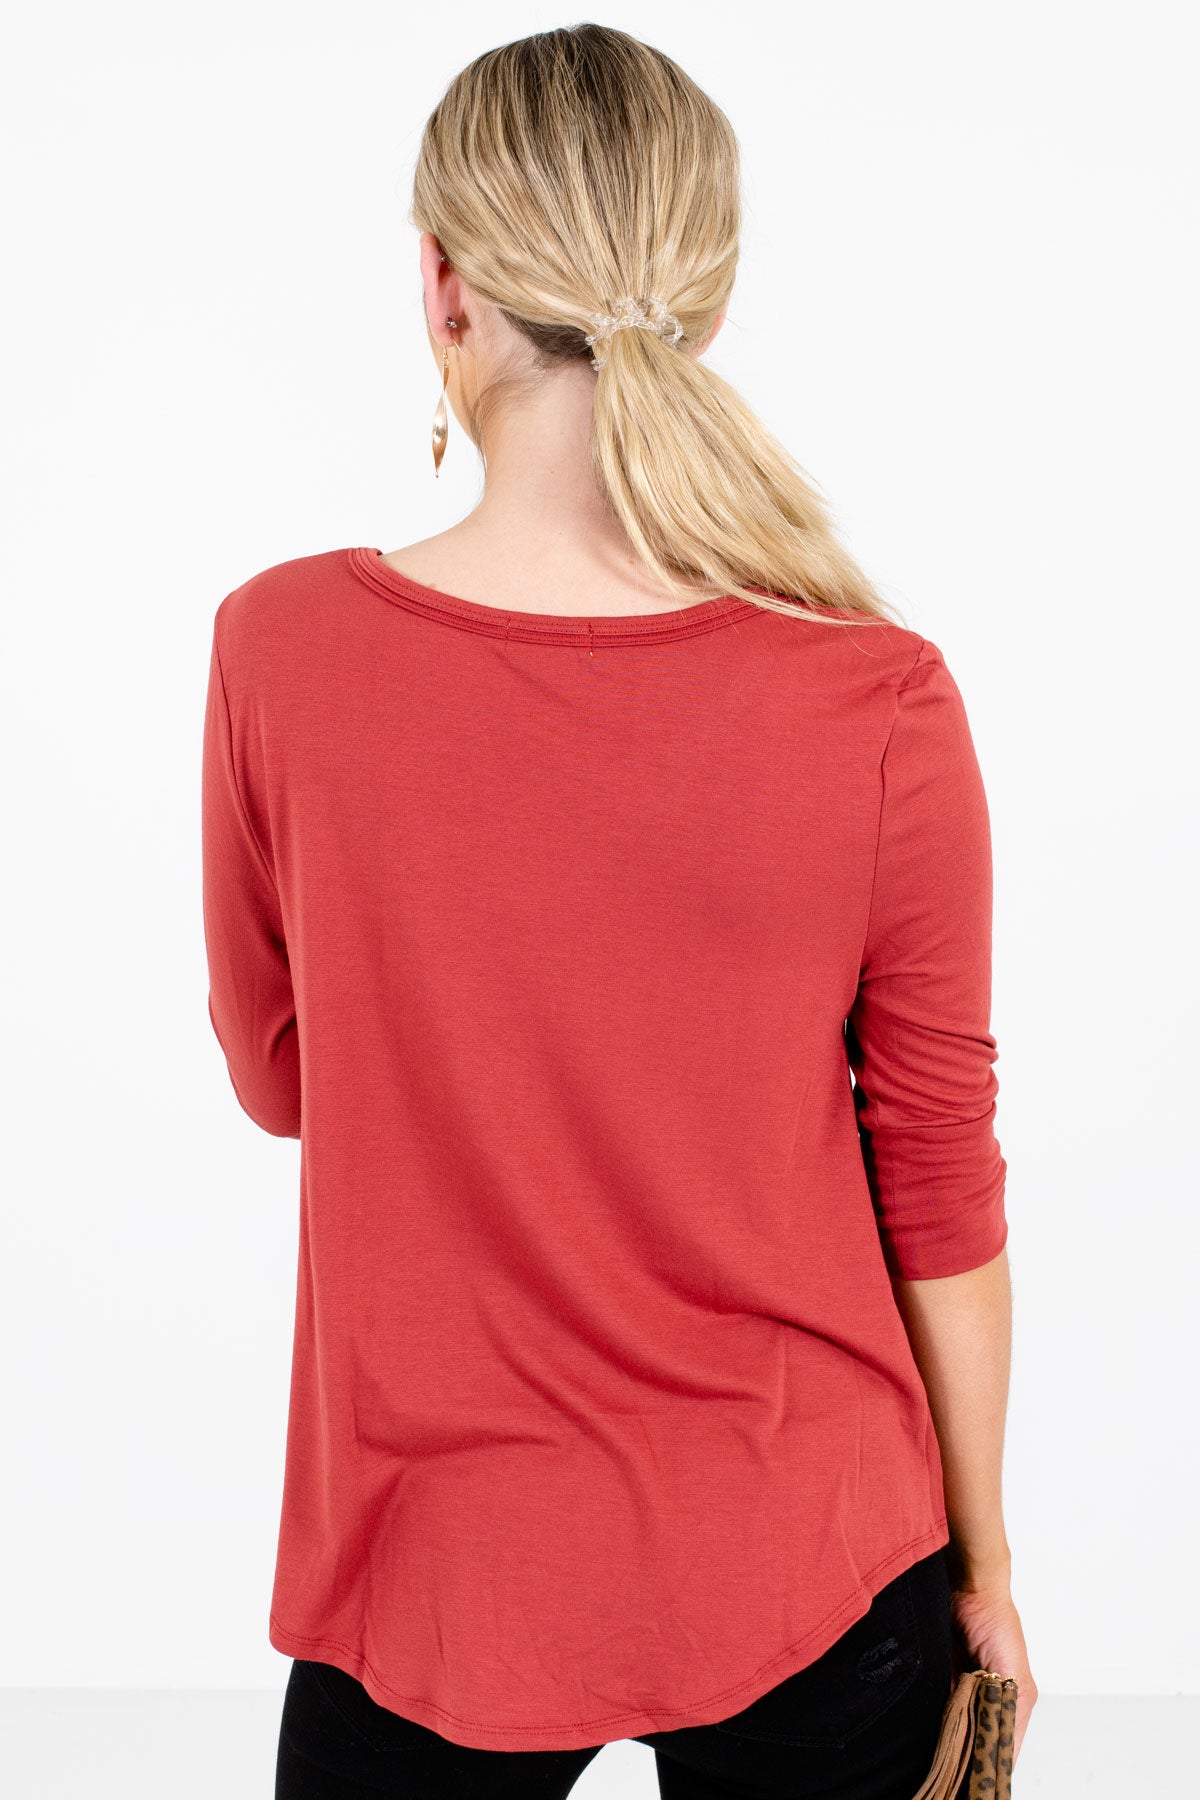 Women's Dark Coral Infinity Knot Detail Boutique Tops